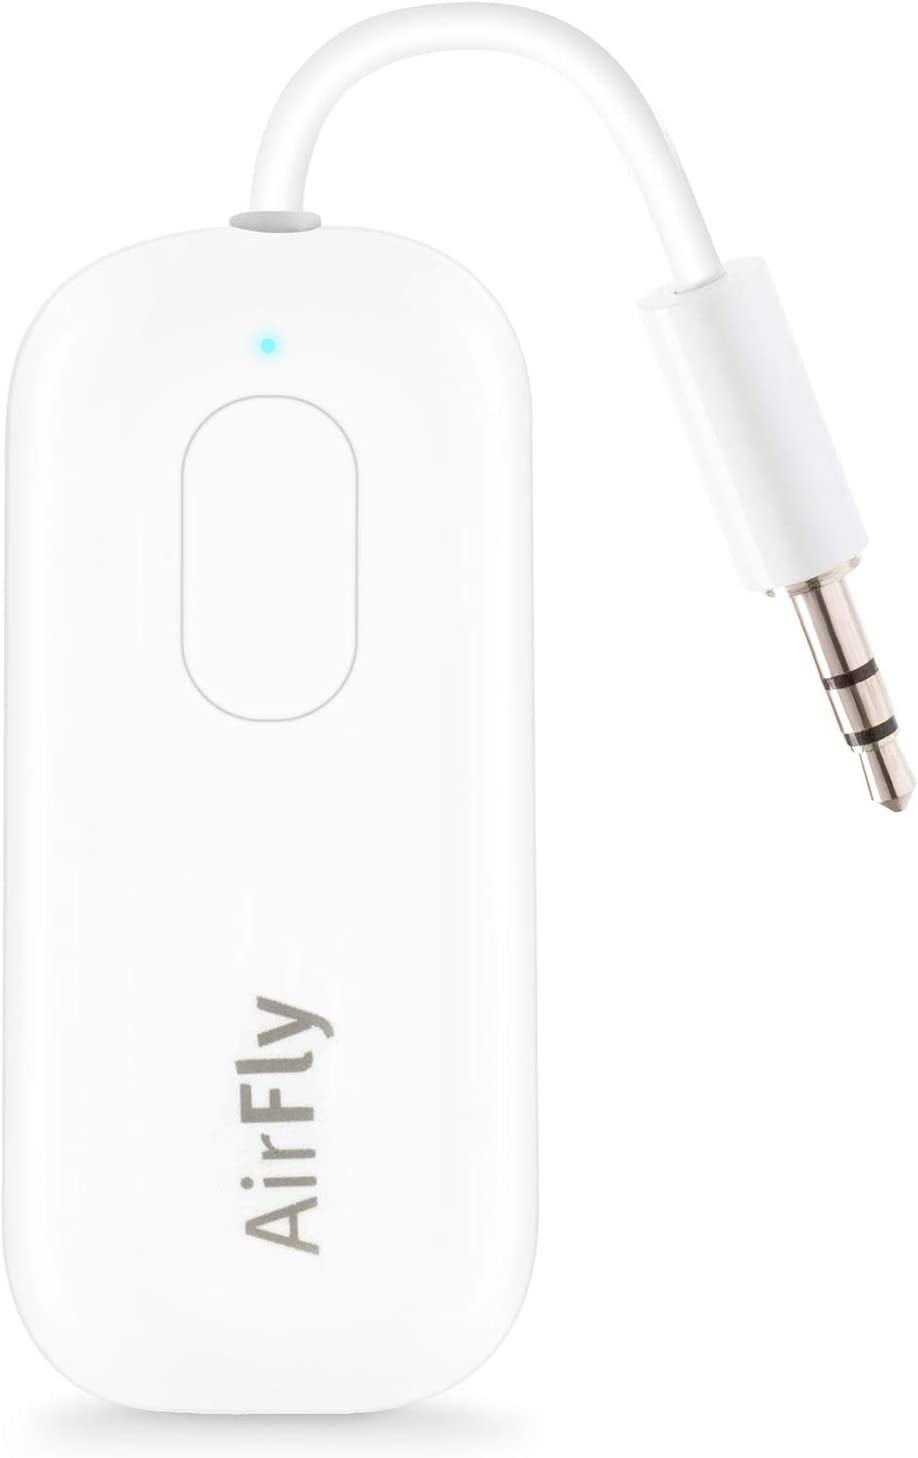 Twelve South AirFly Pro | Wireless Transmitter:Receiver with Audio Sharing for up to 2 AirPods:Wireless Headphones to Any Audio Jack for use on Airplanes